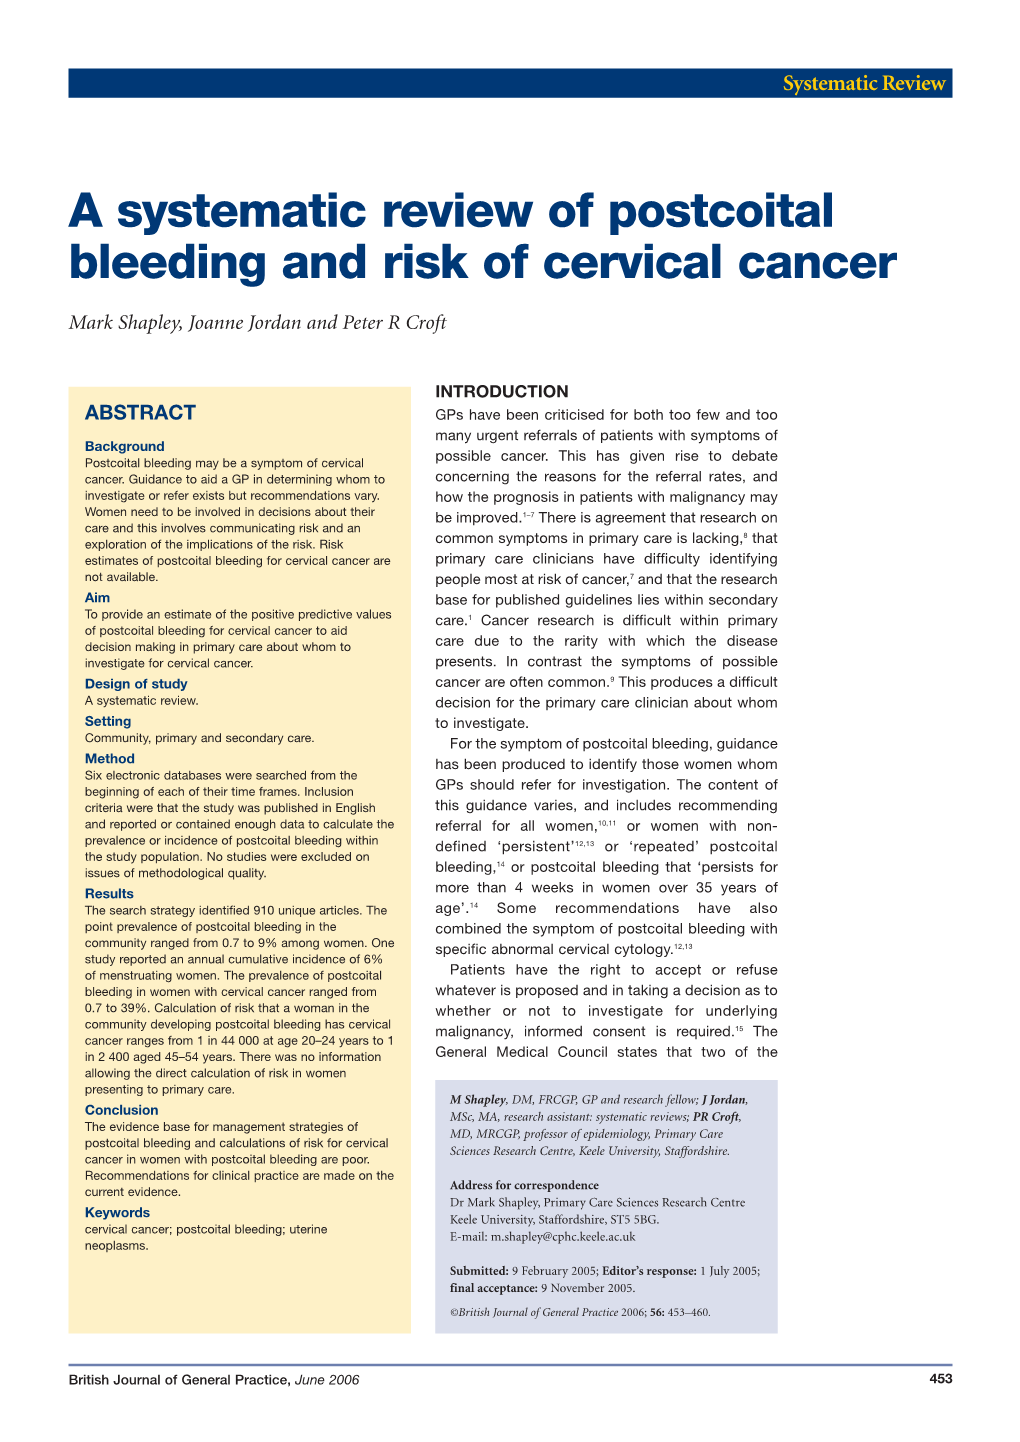 A Systematic Review of Postcoital Bleeding and Risk of Cervical Cancer